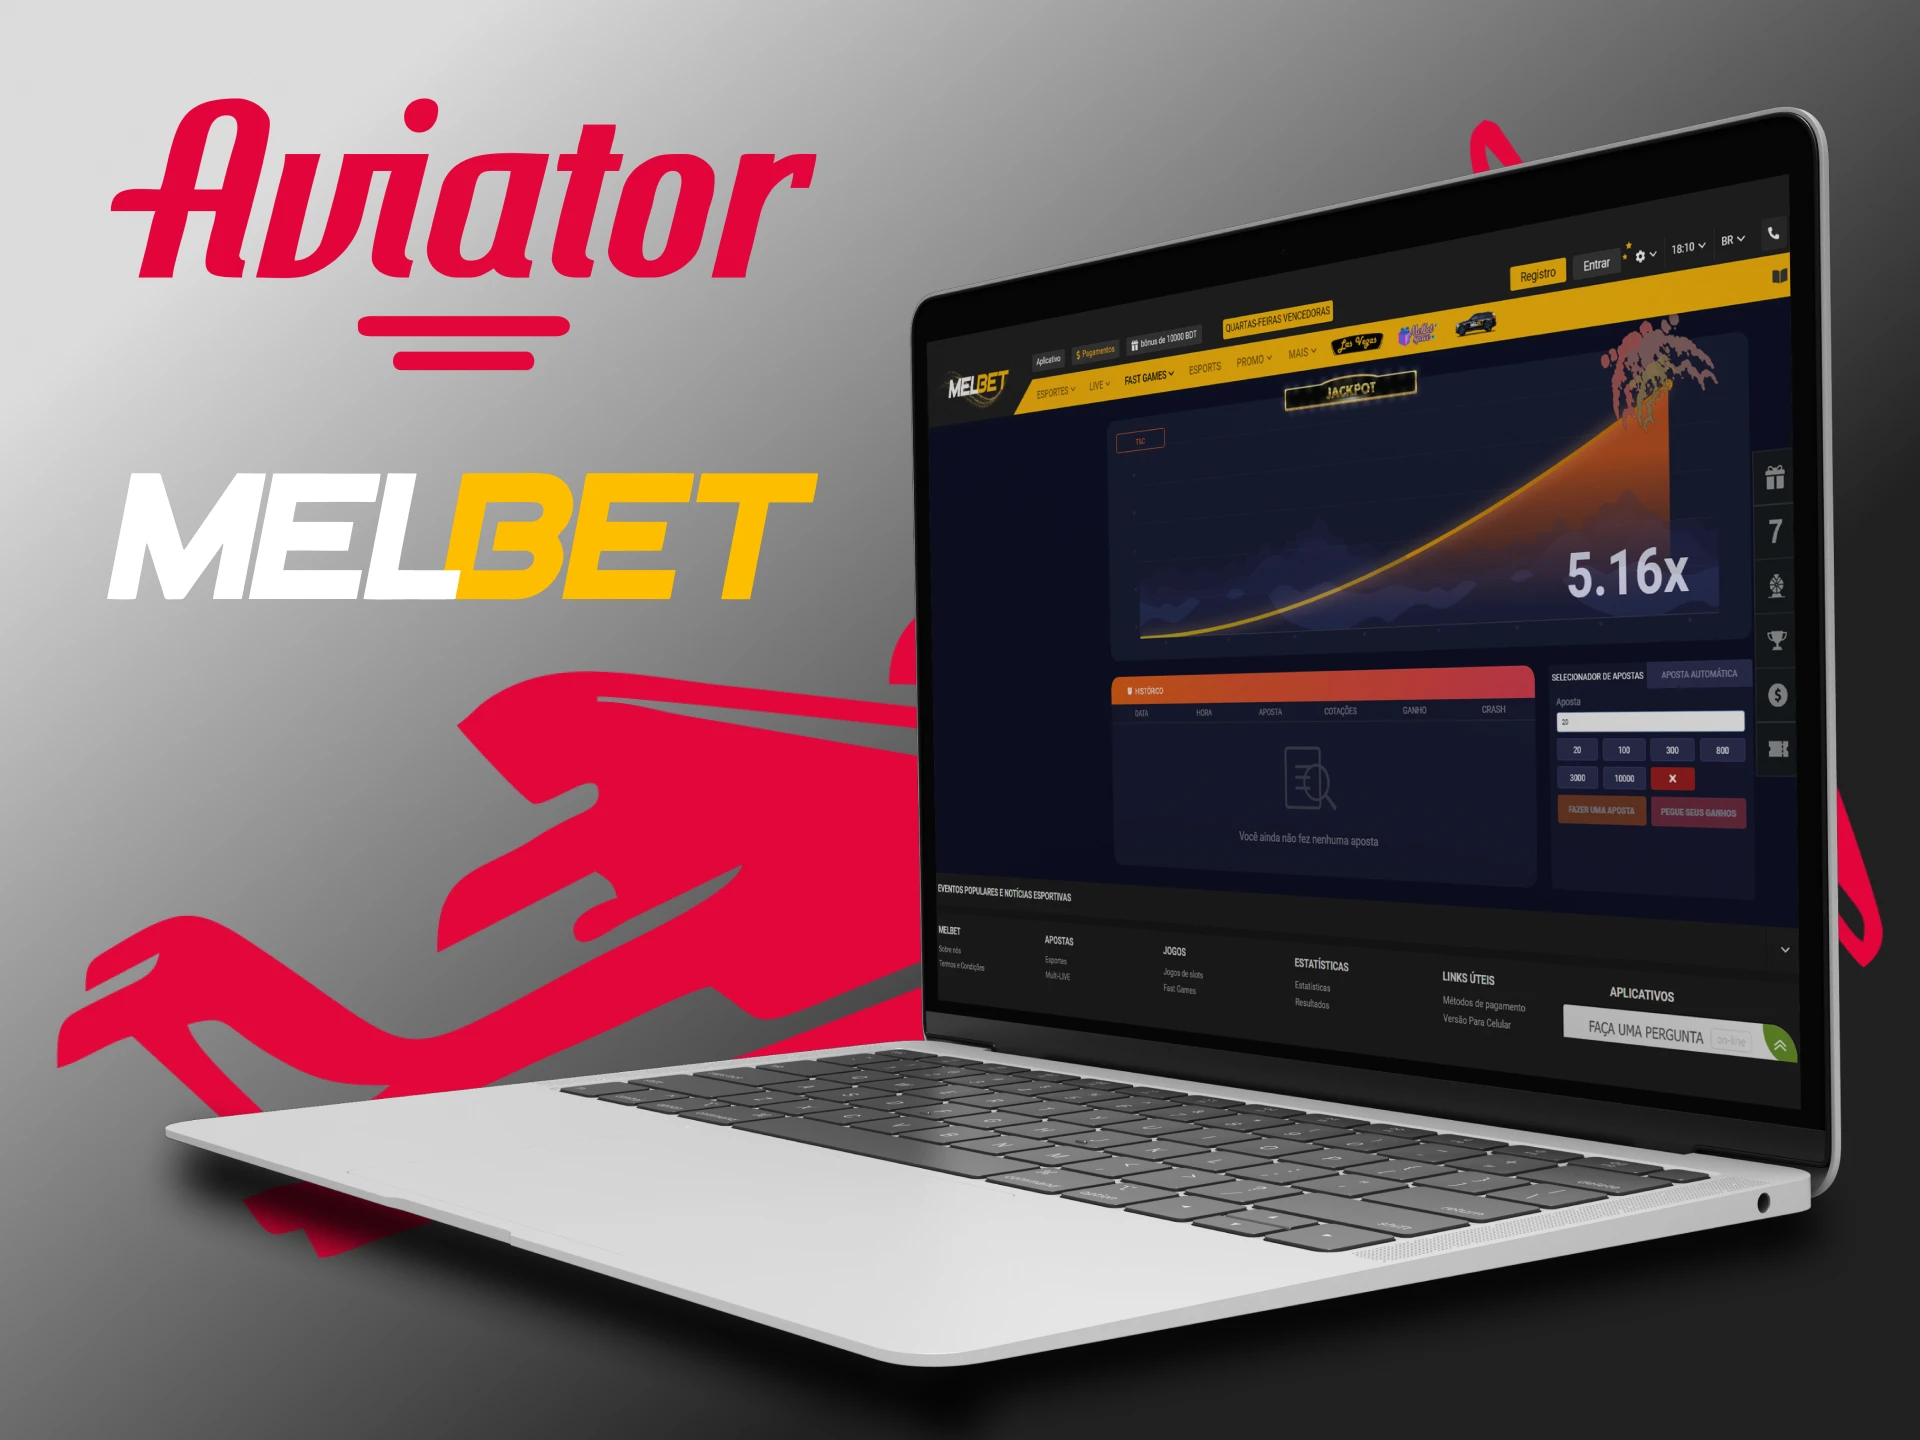 You can play the Aviator game on the Melbet website.